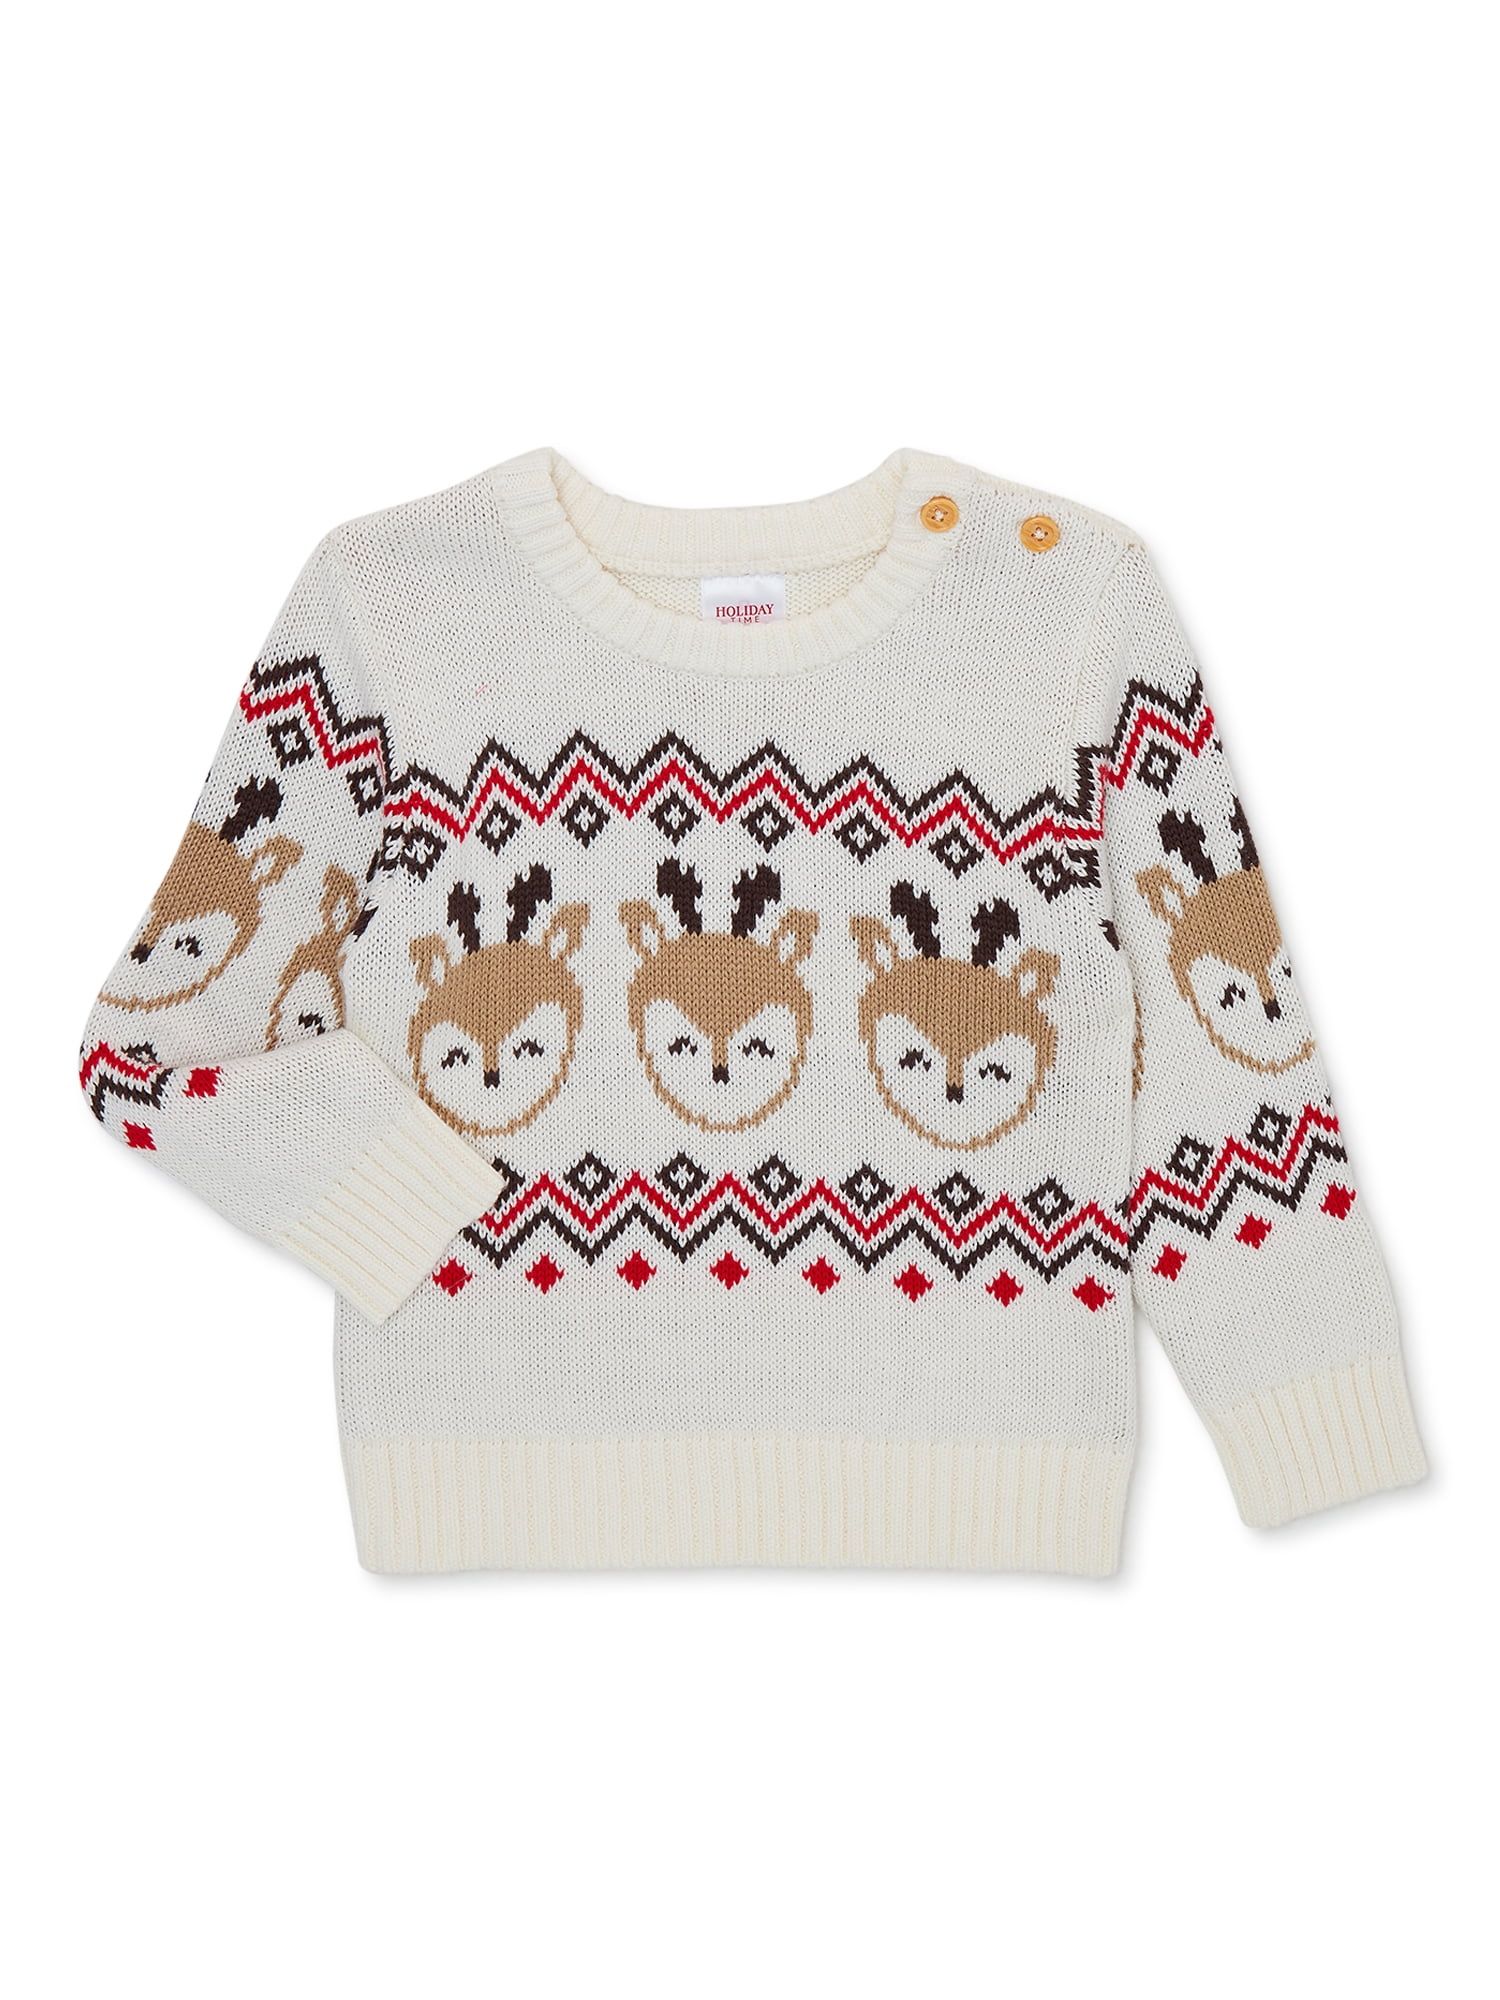 Holiday Time Baby and Toddler Boy or Girls Unisex Sweater, Sizes 12 Months to 5T | Walmart (US)